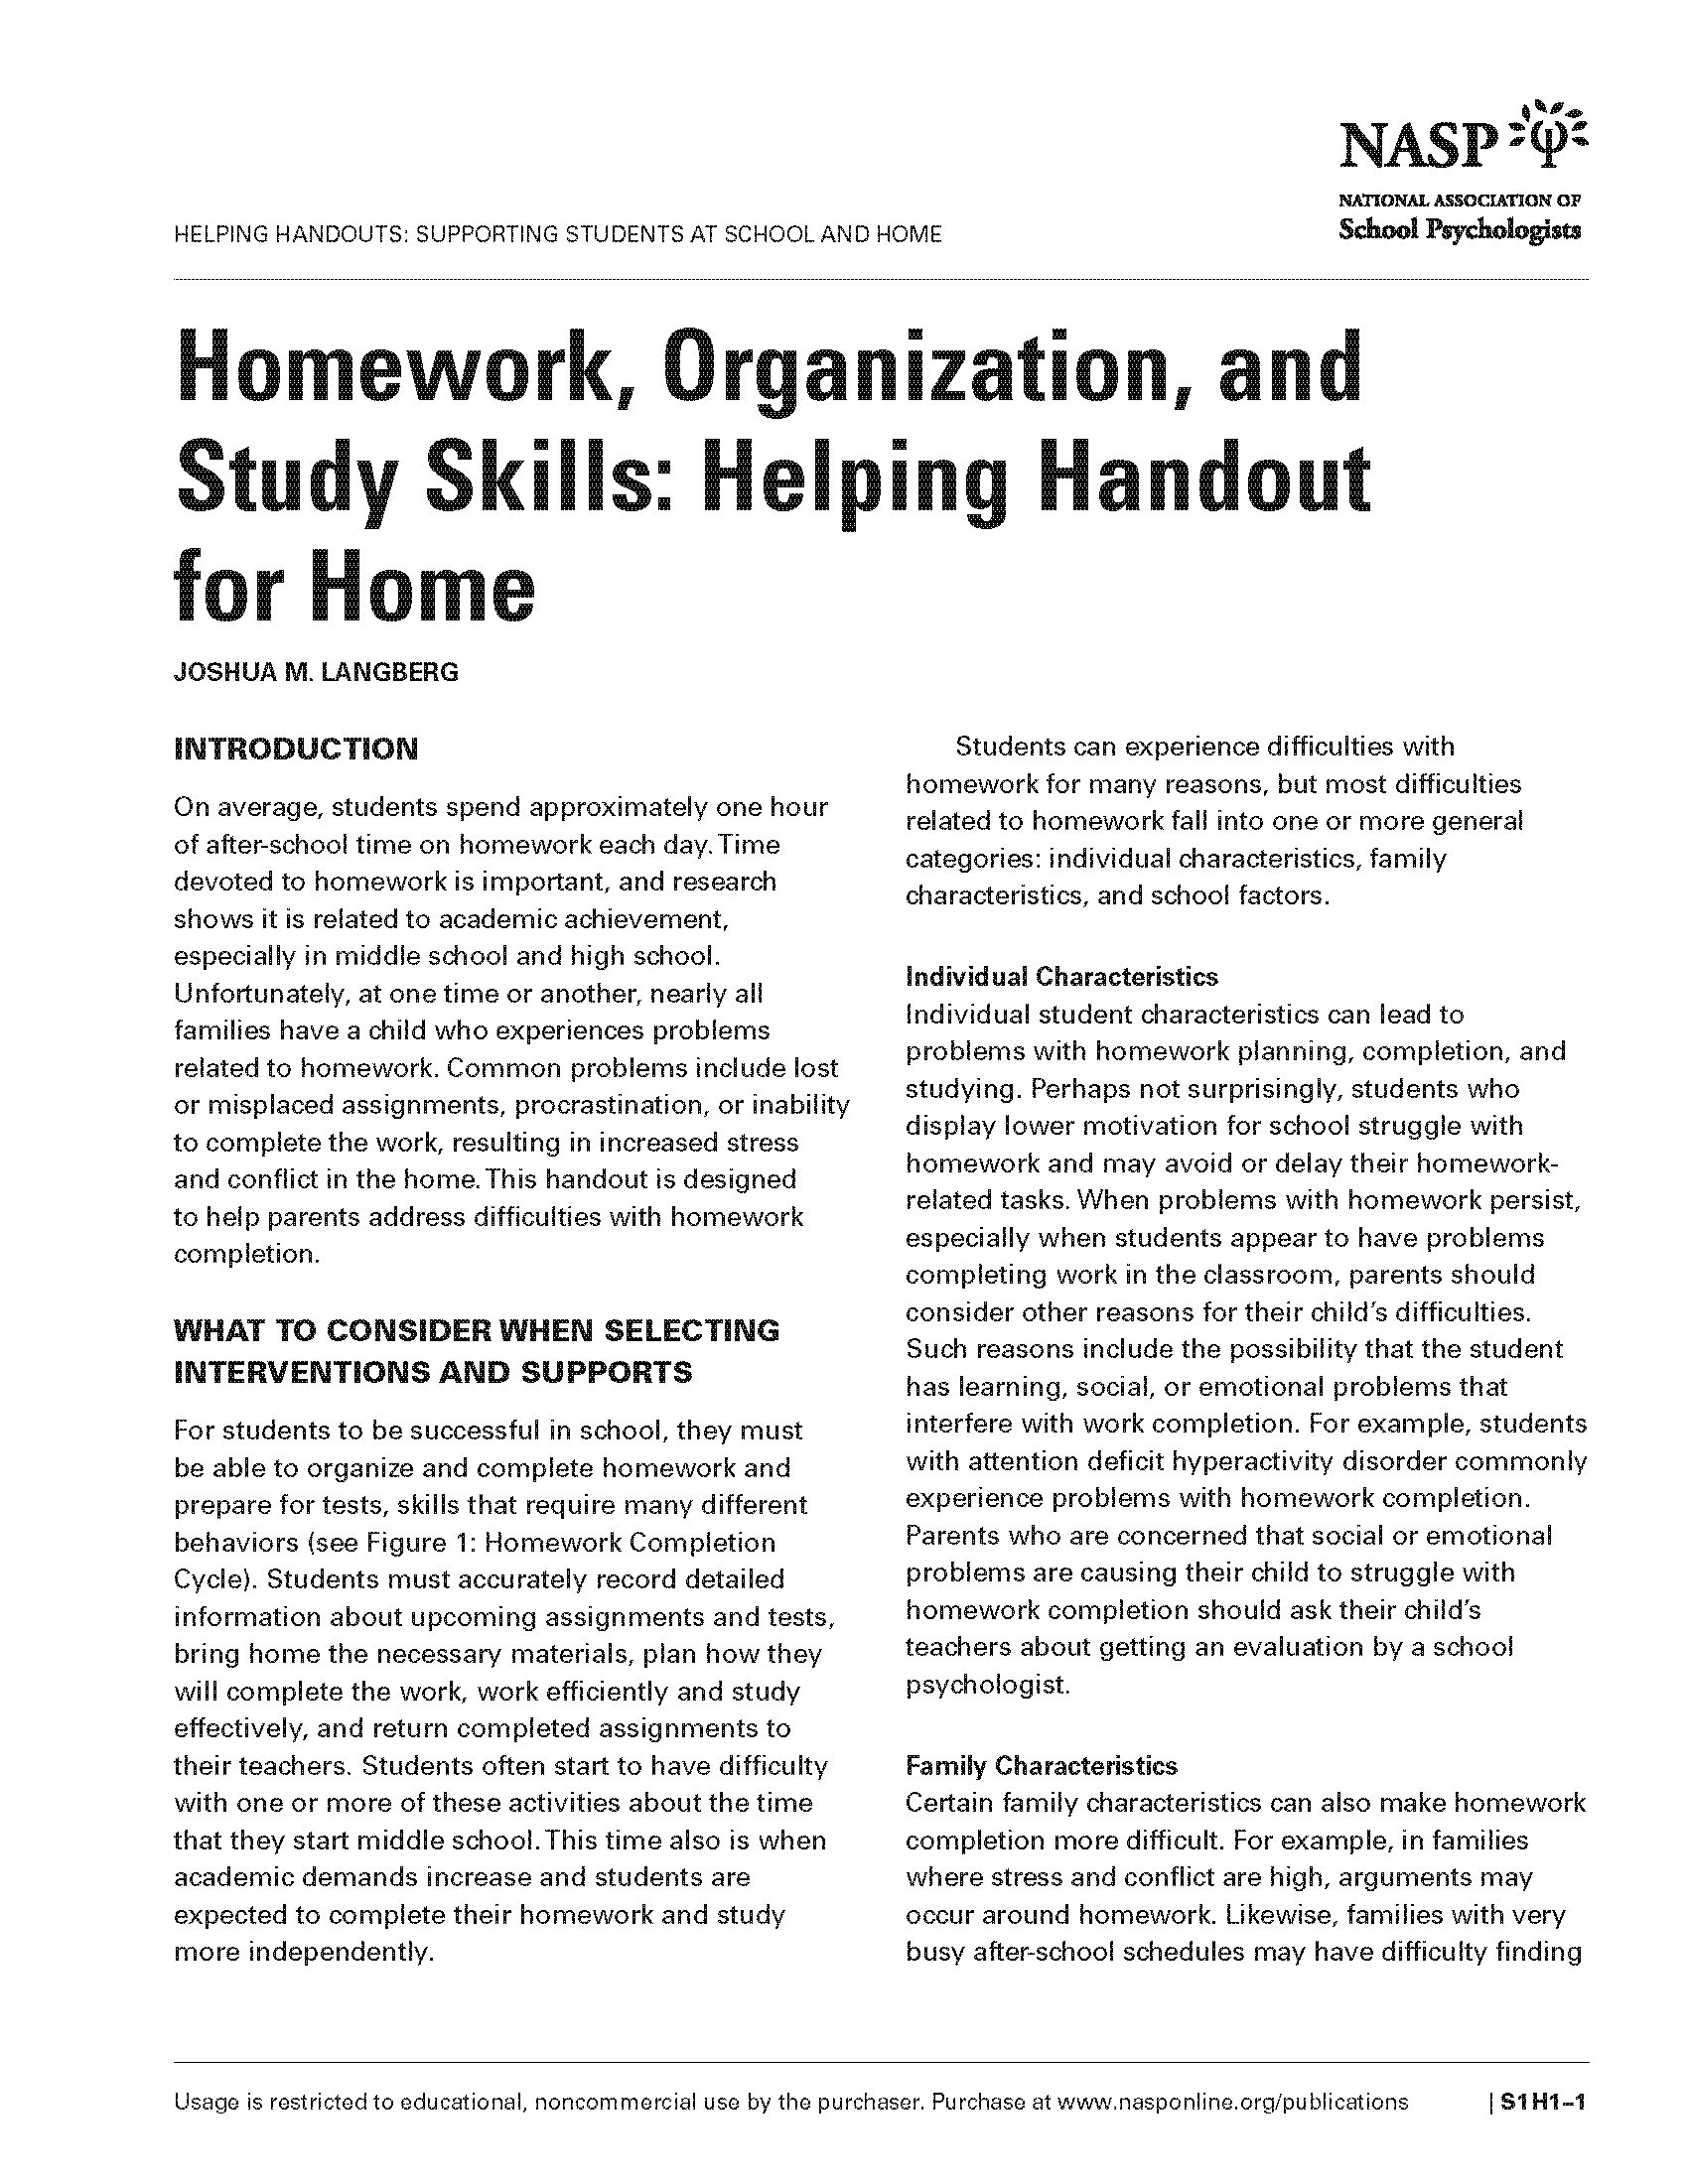 Homework, Organization, and Study Skills: Helping Handout for Home